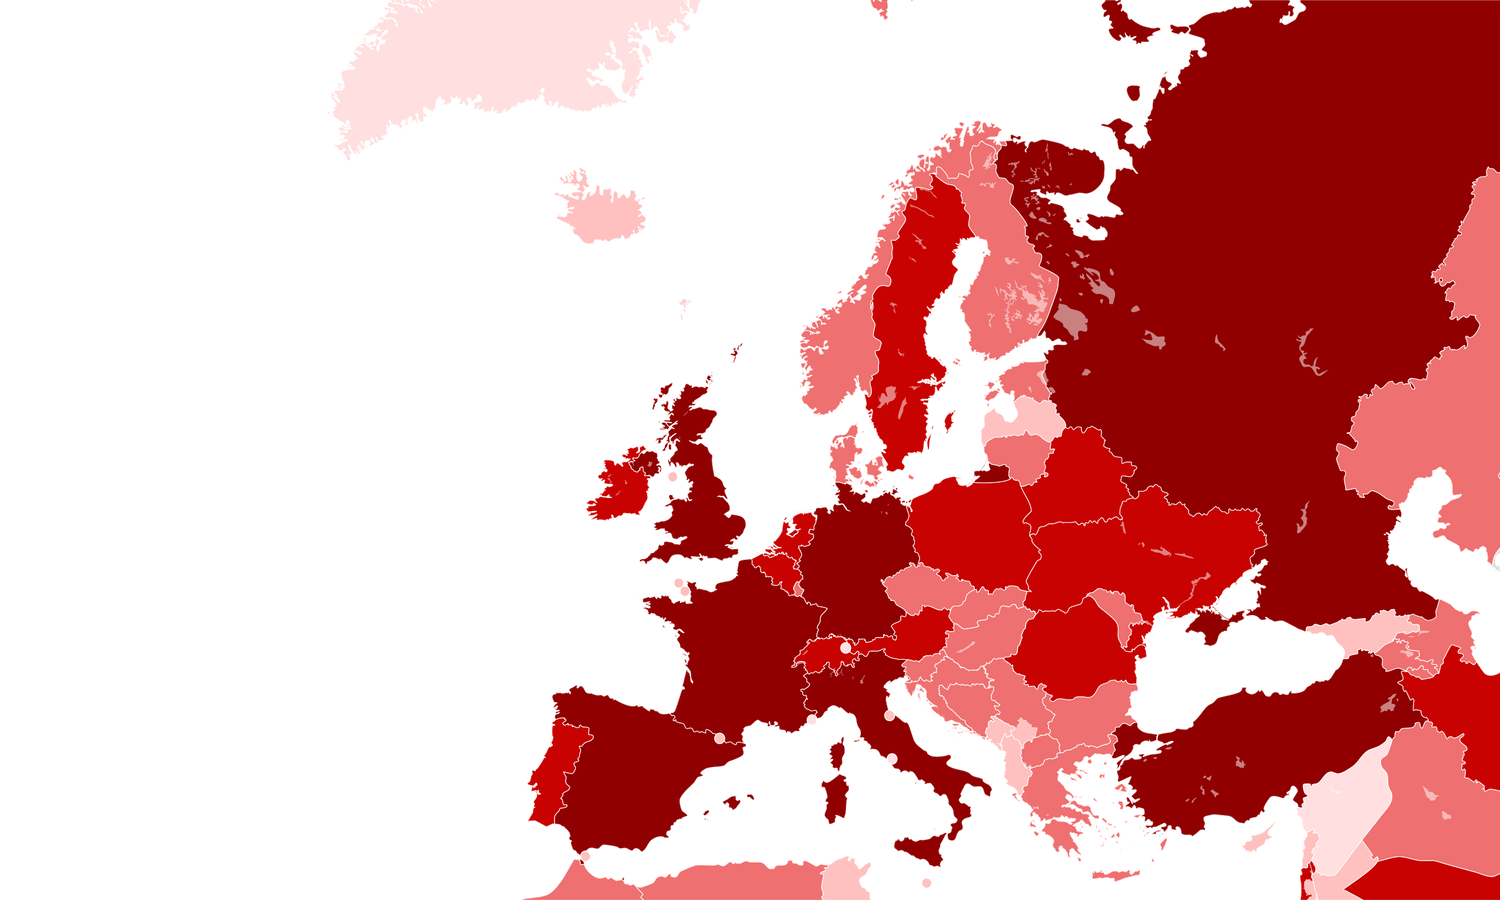 In March’s EU Policy Update we shared a version of the above map available from Wikimedia. This updated map shows coronavirus outbreak density across Europe as of April 30, 2020. Maps like this use data aggregated from multiple health organizations …